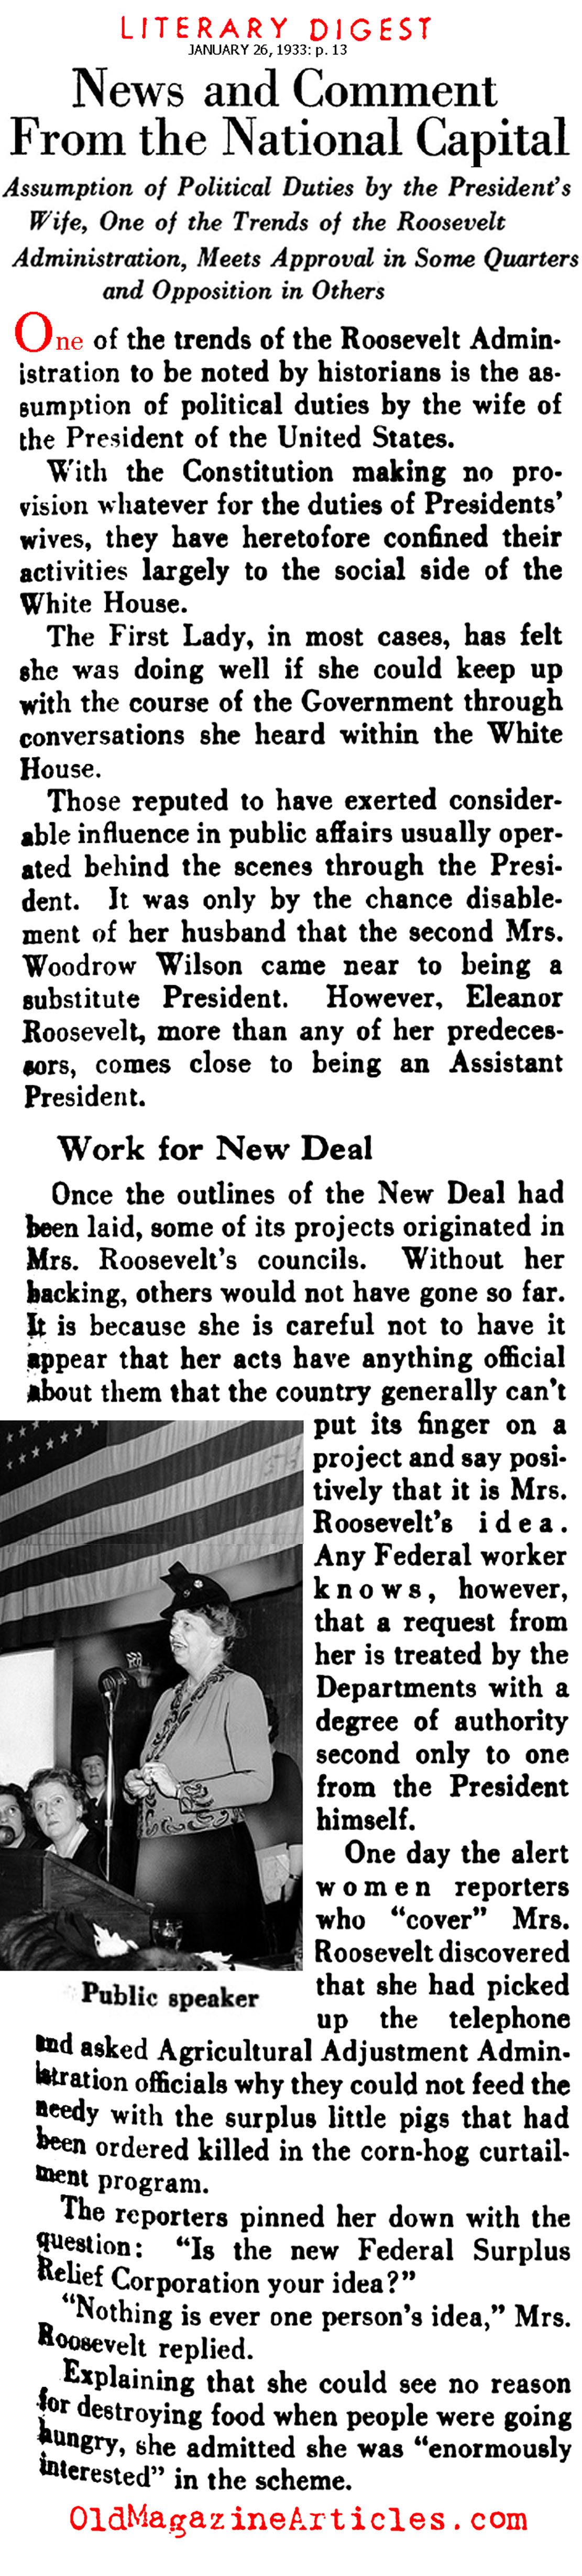 Eleanor Roosevelt Was a Very Different First Lady  (The Literary Digest, 1933)